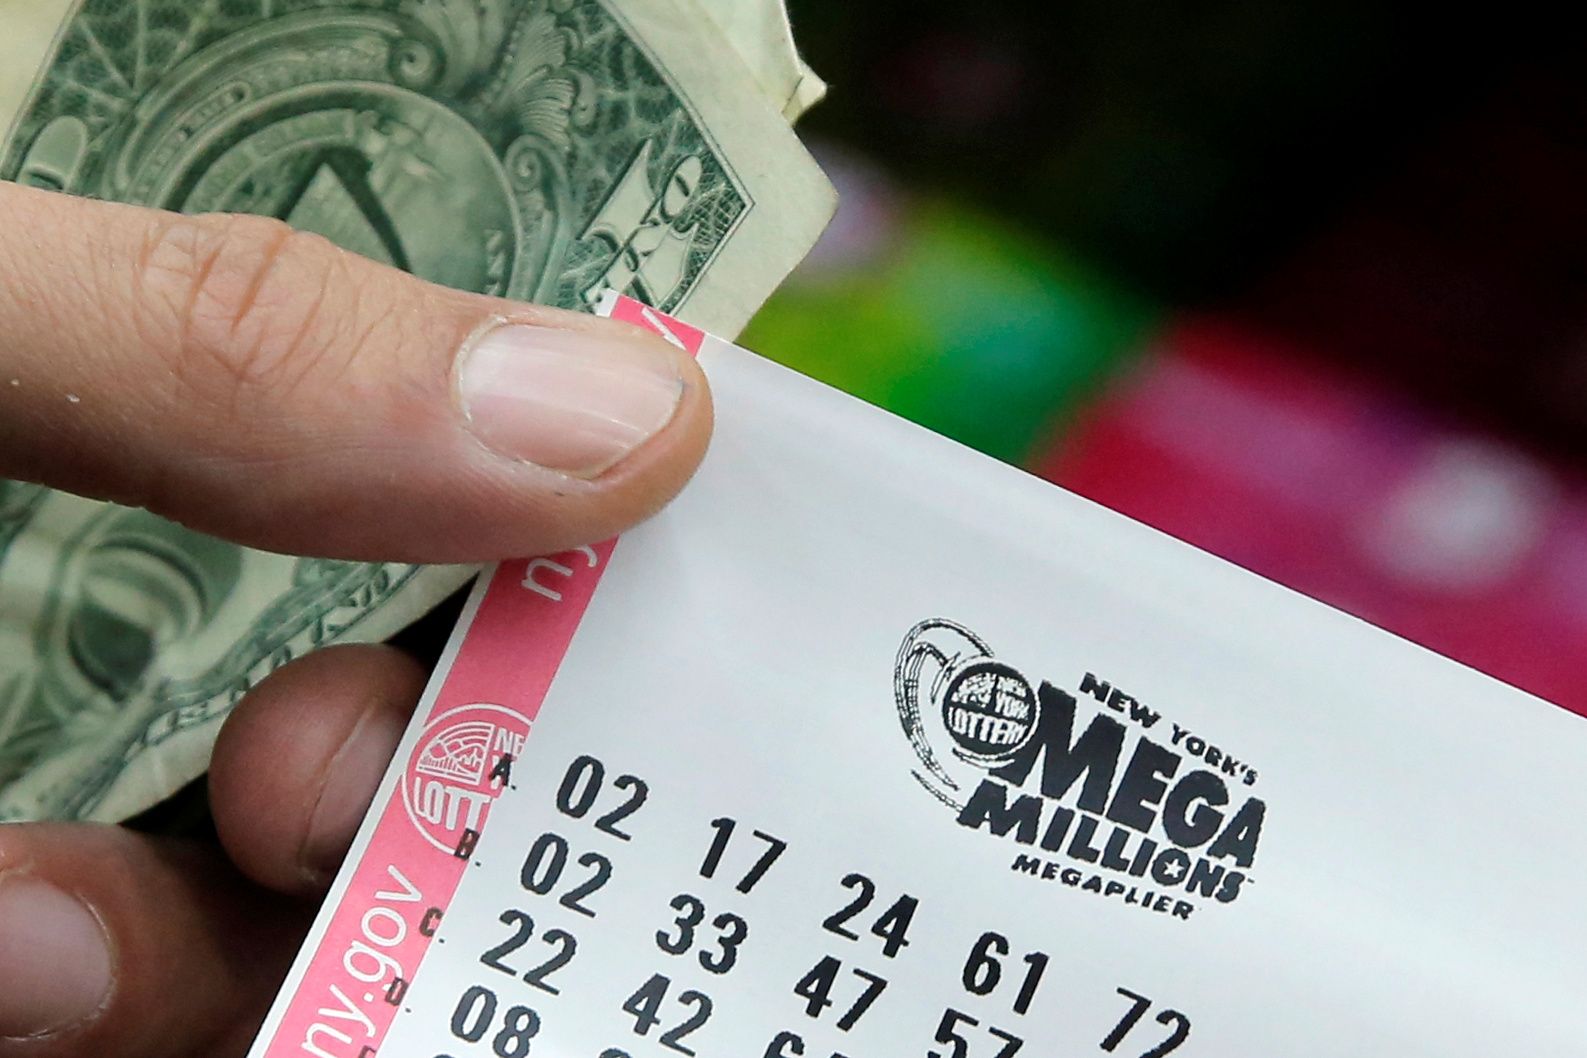 Friday the 13th's Mega Millions Jackpot Is 340 Million How to Play